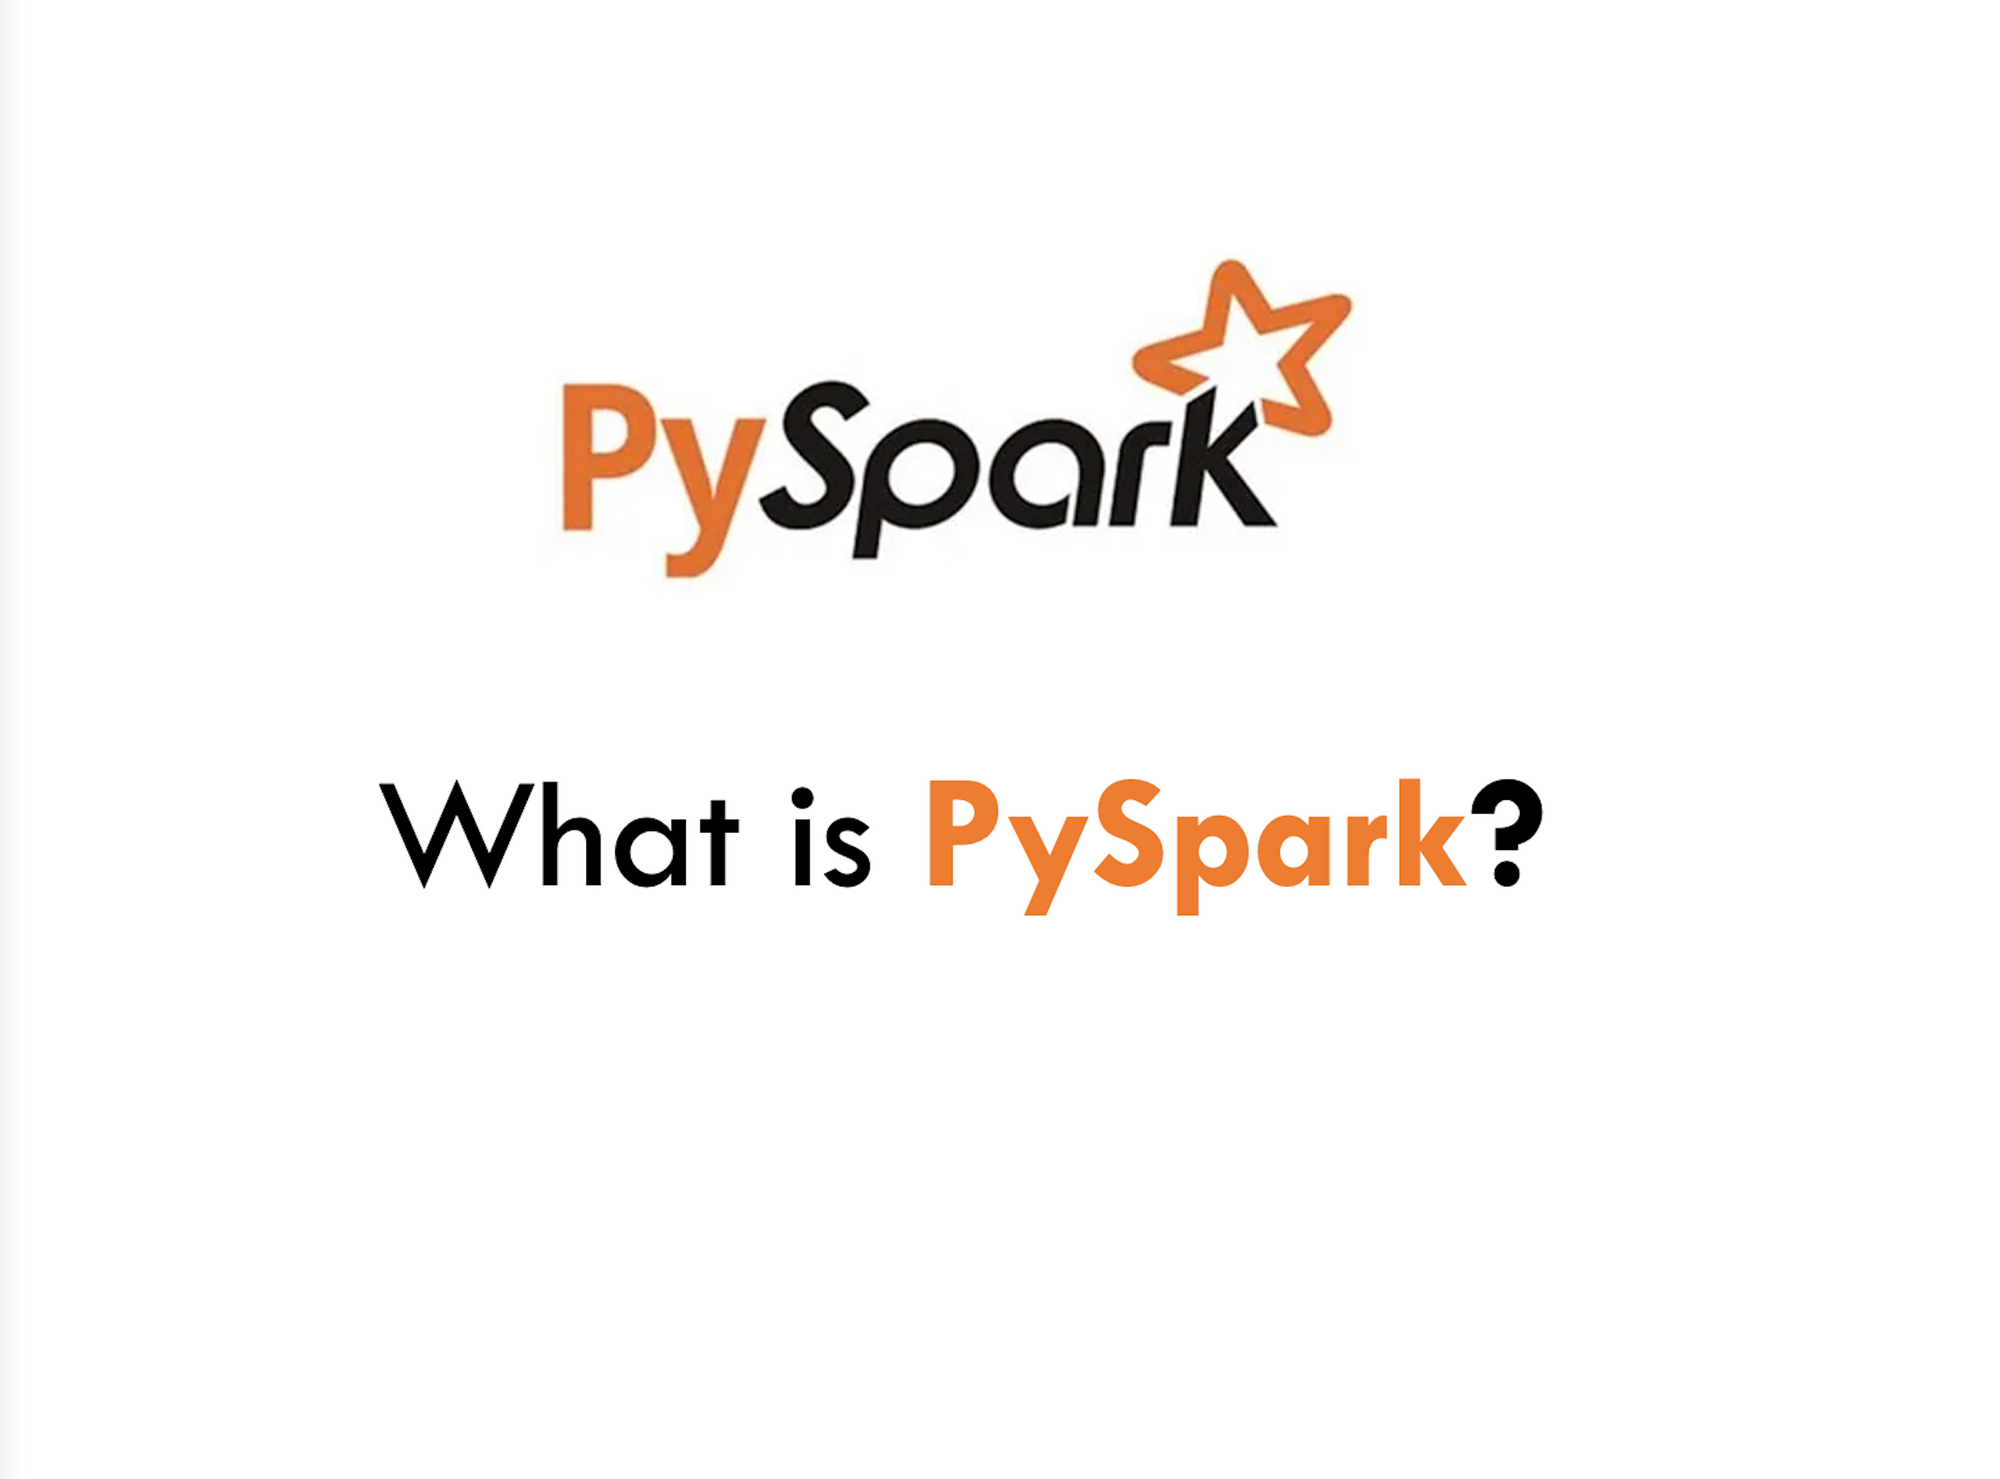 PySpark: What Is PySpark